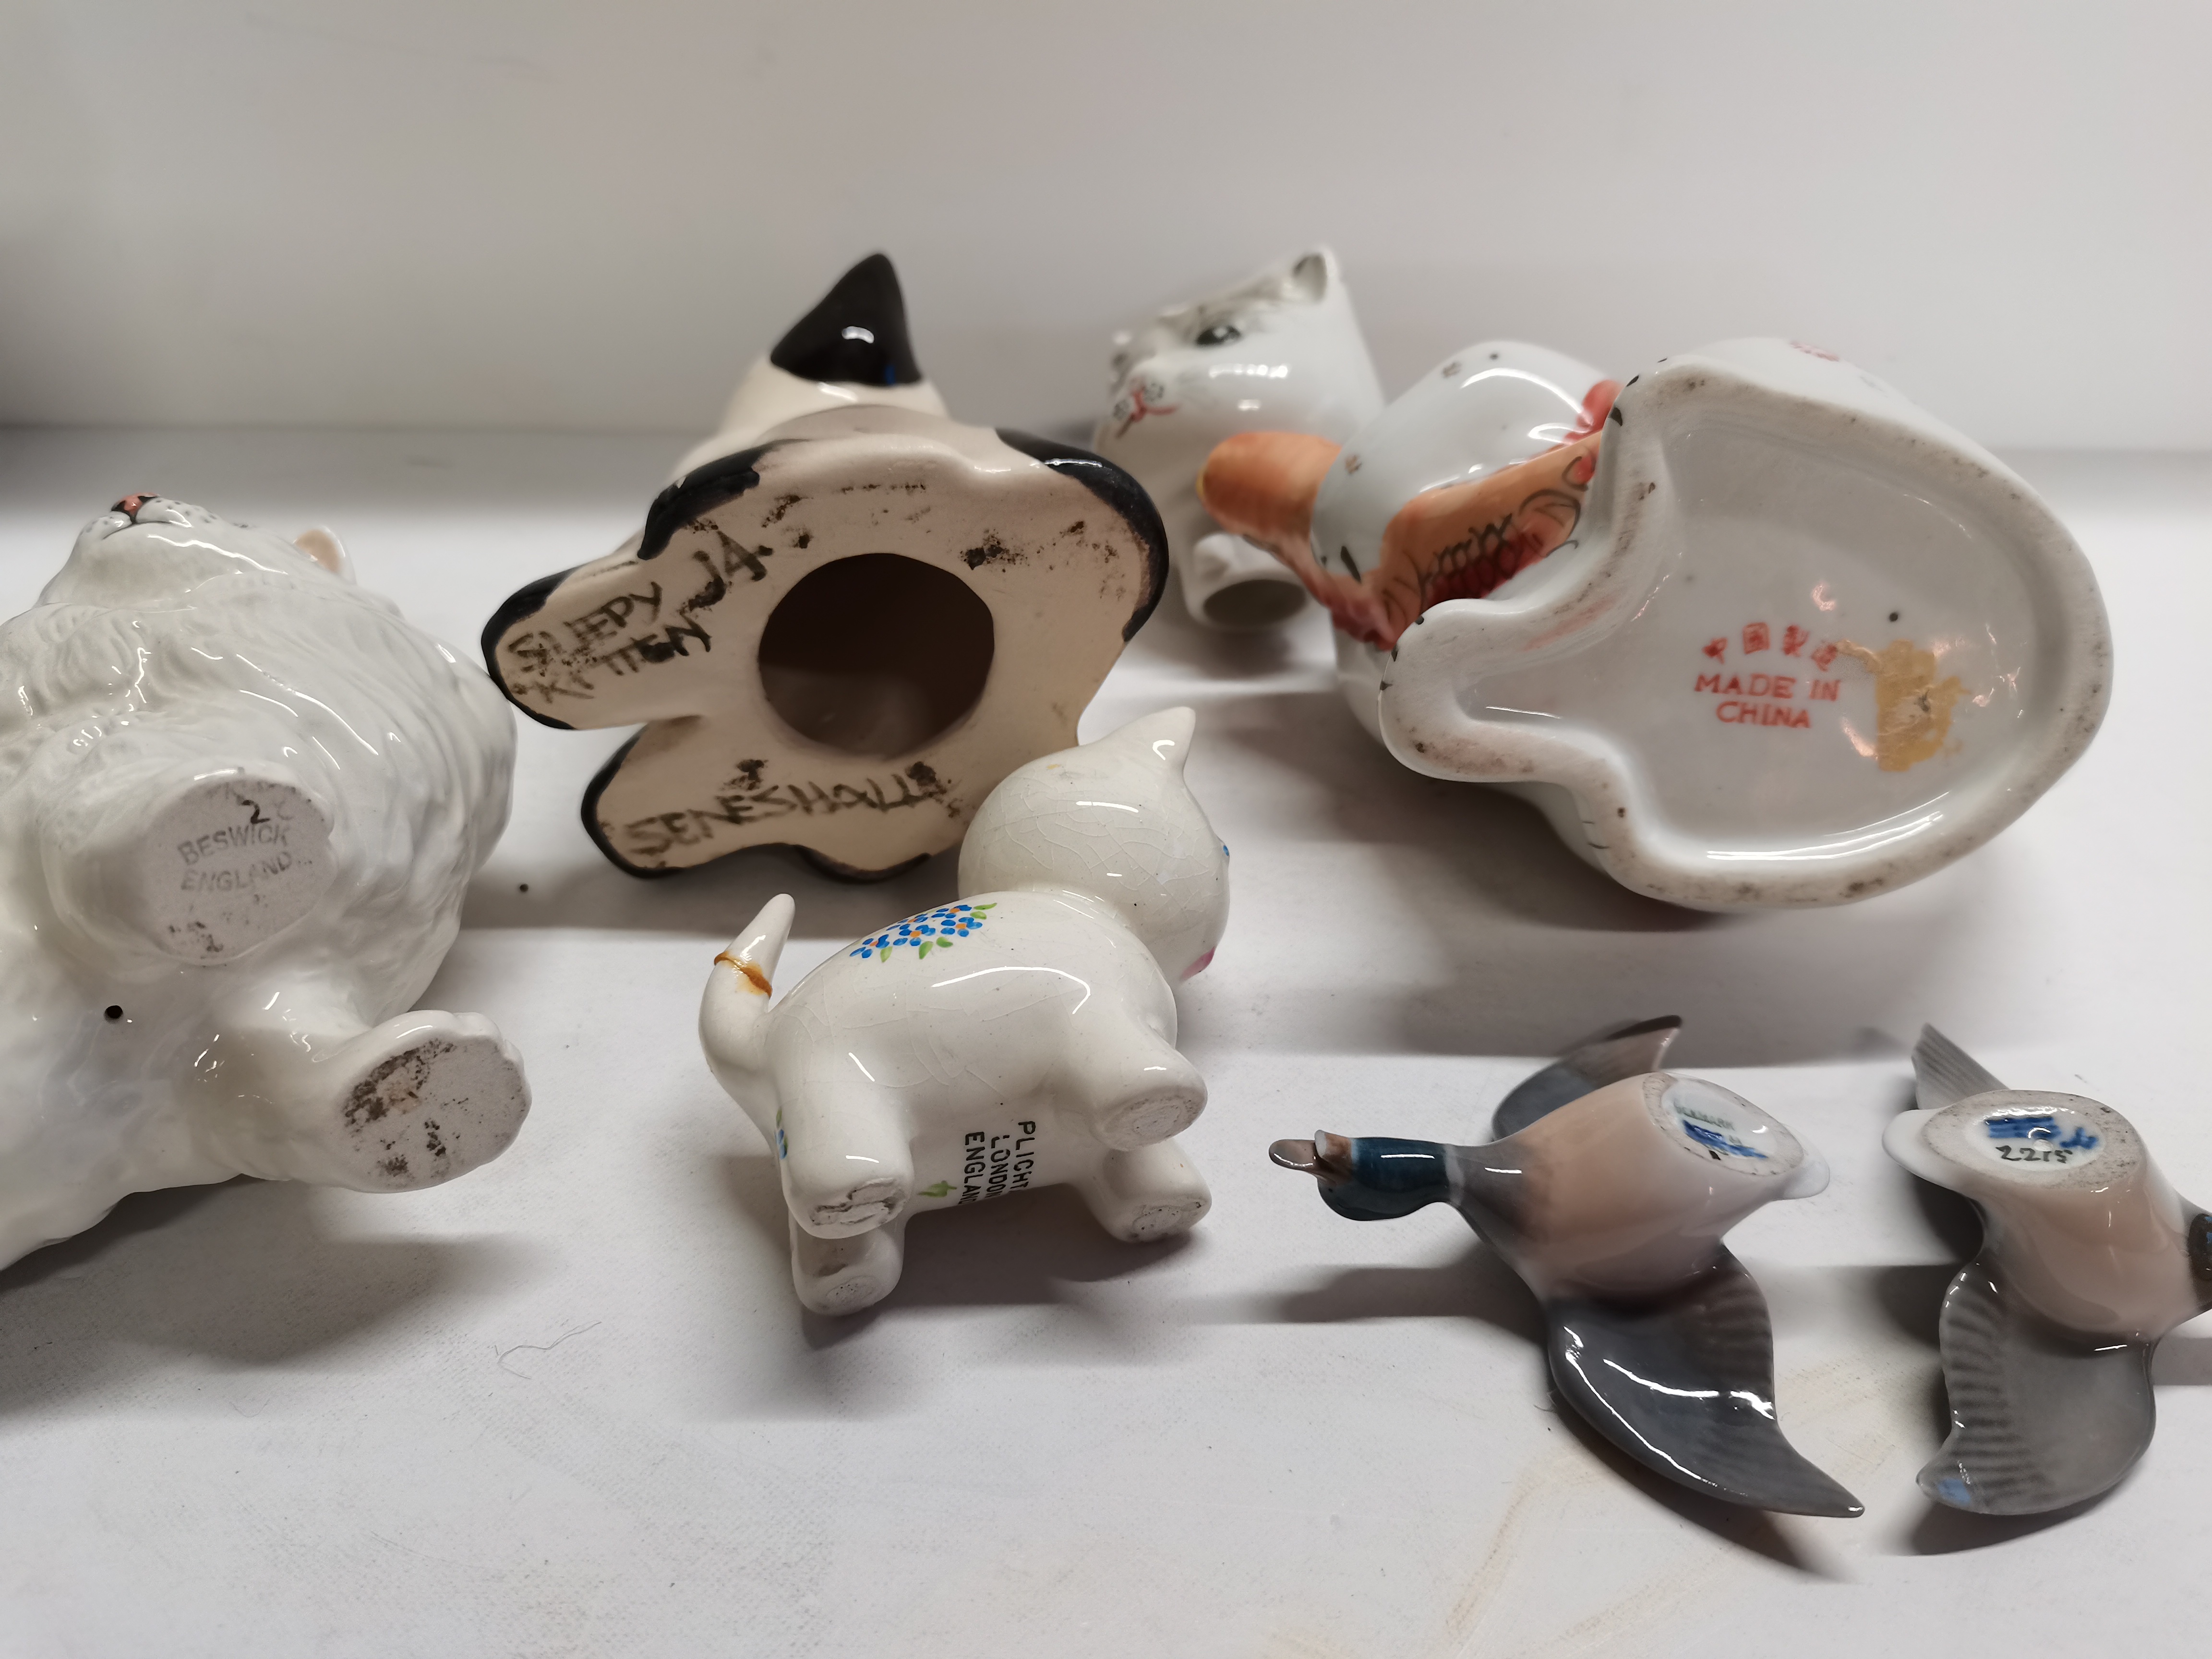 13 Pieces of Pottery 10 cats 2 ducks and a donkey Including 1 Beswick Cat (Damaged Ear to Donkey) - Image 2 of 2